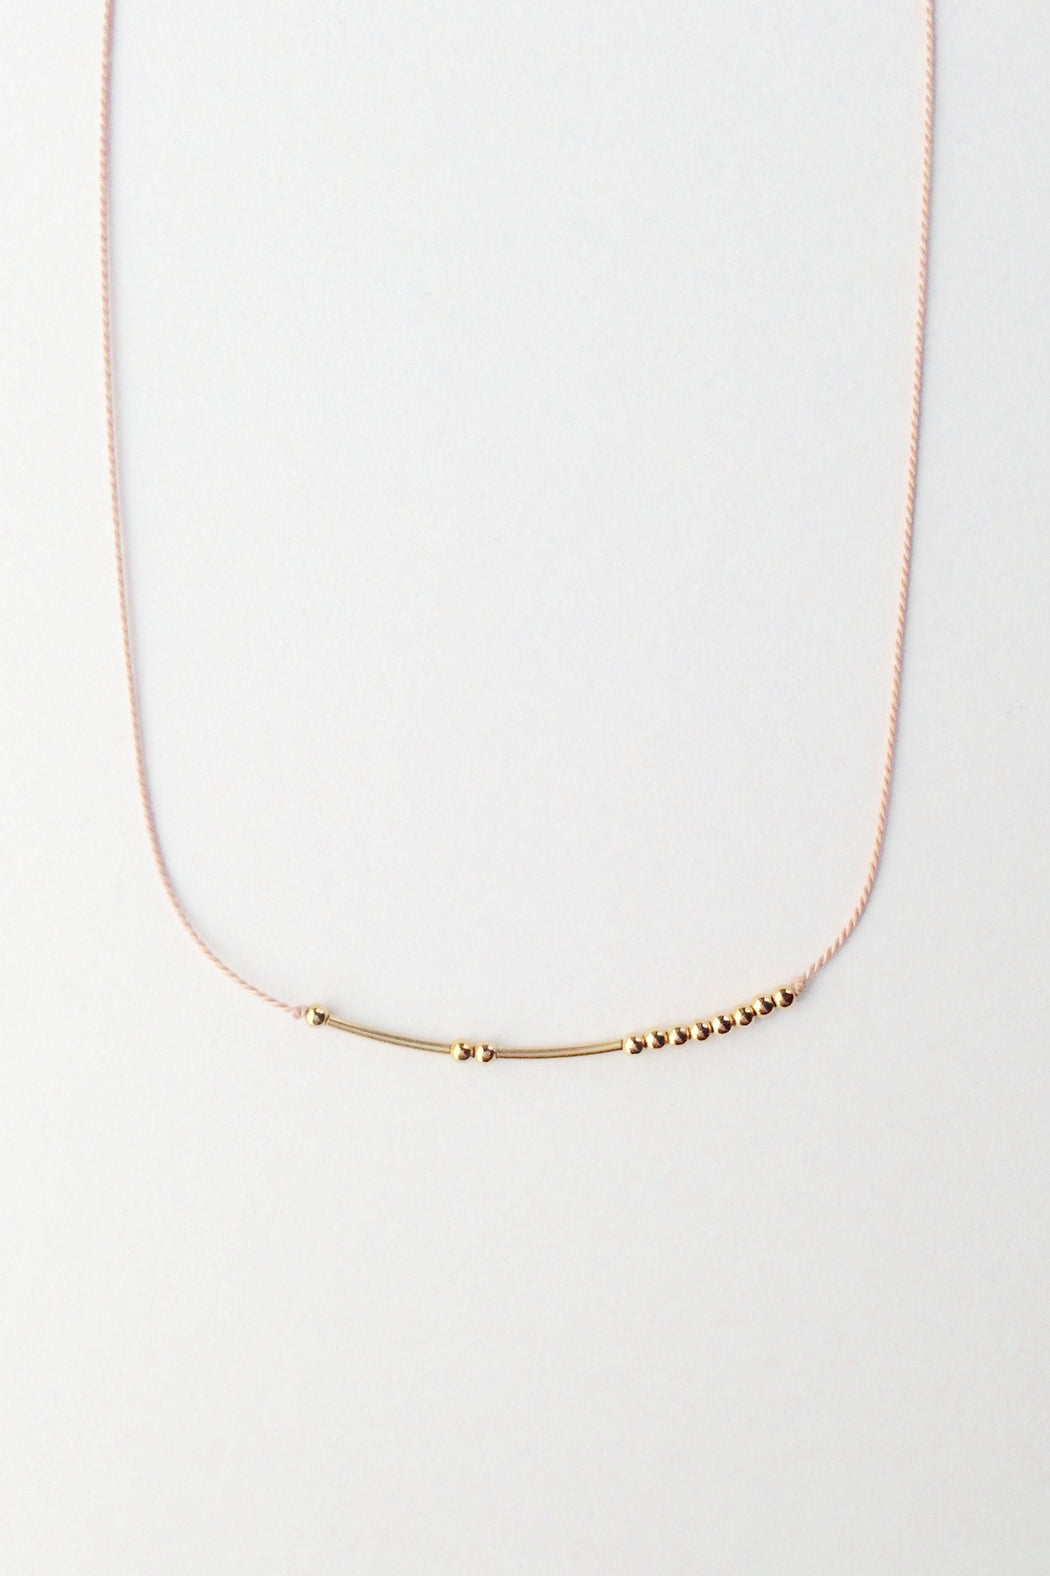 Morse Code :: Word Necklace 18" gold fill